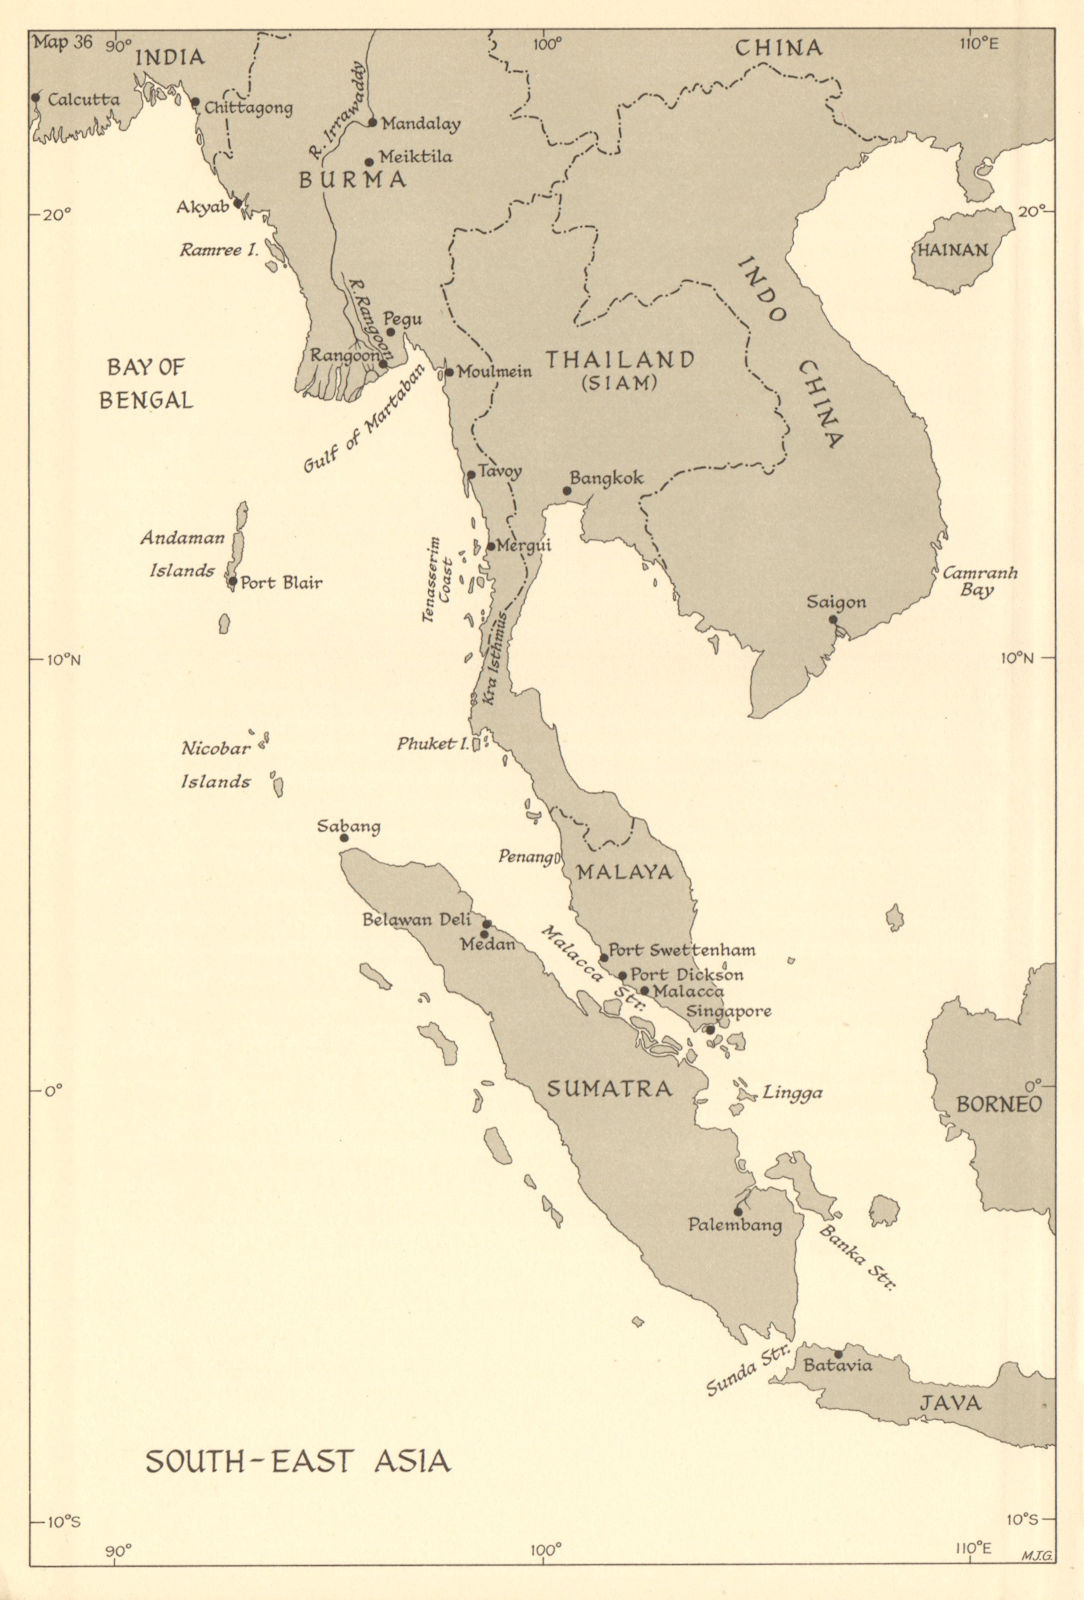 South-East Asia. Indochina in 1944. Ports. World War 2 naval campaigns 1961 map